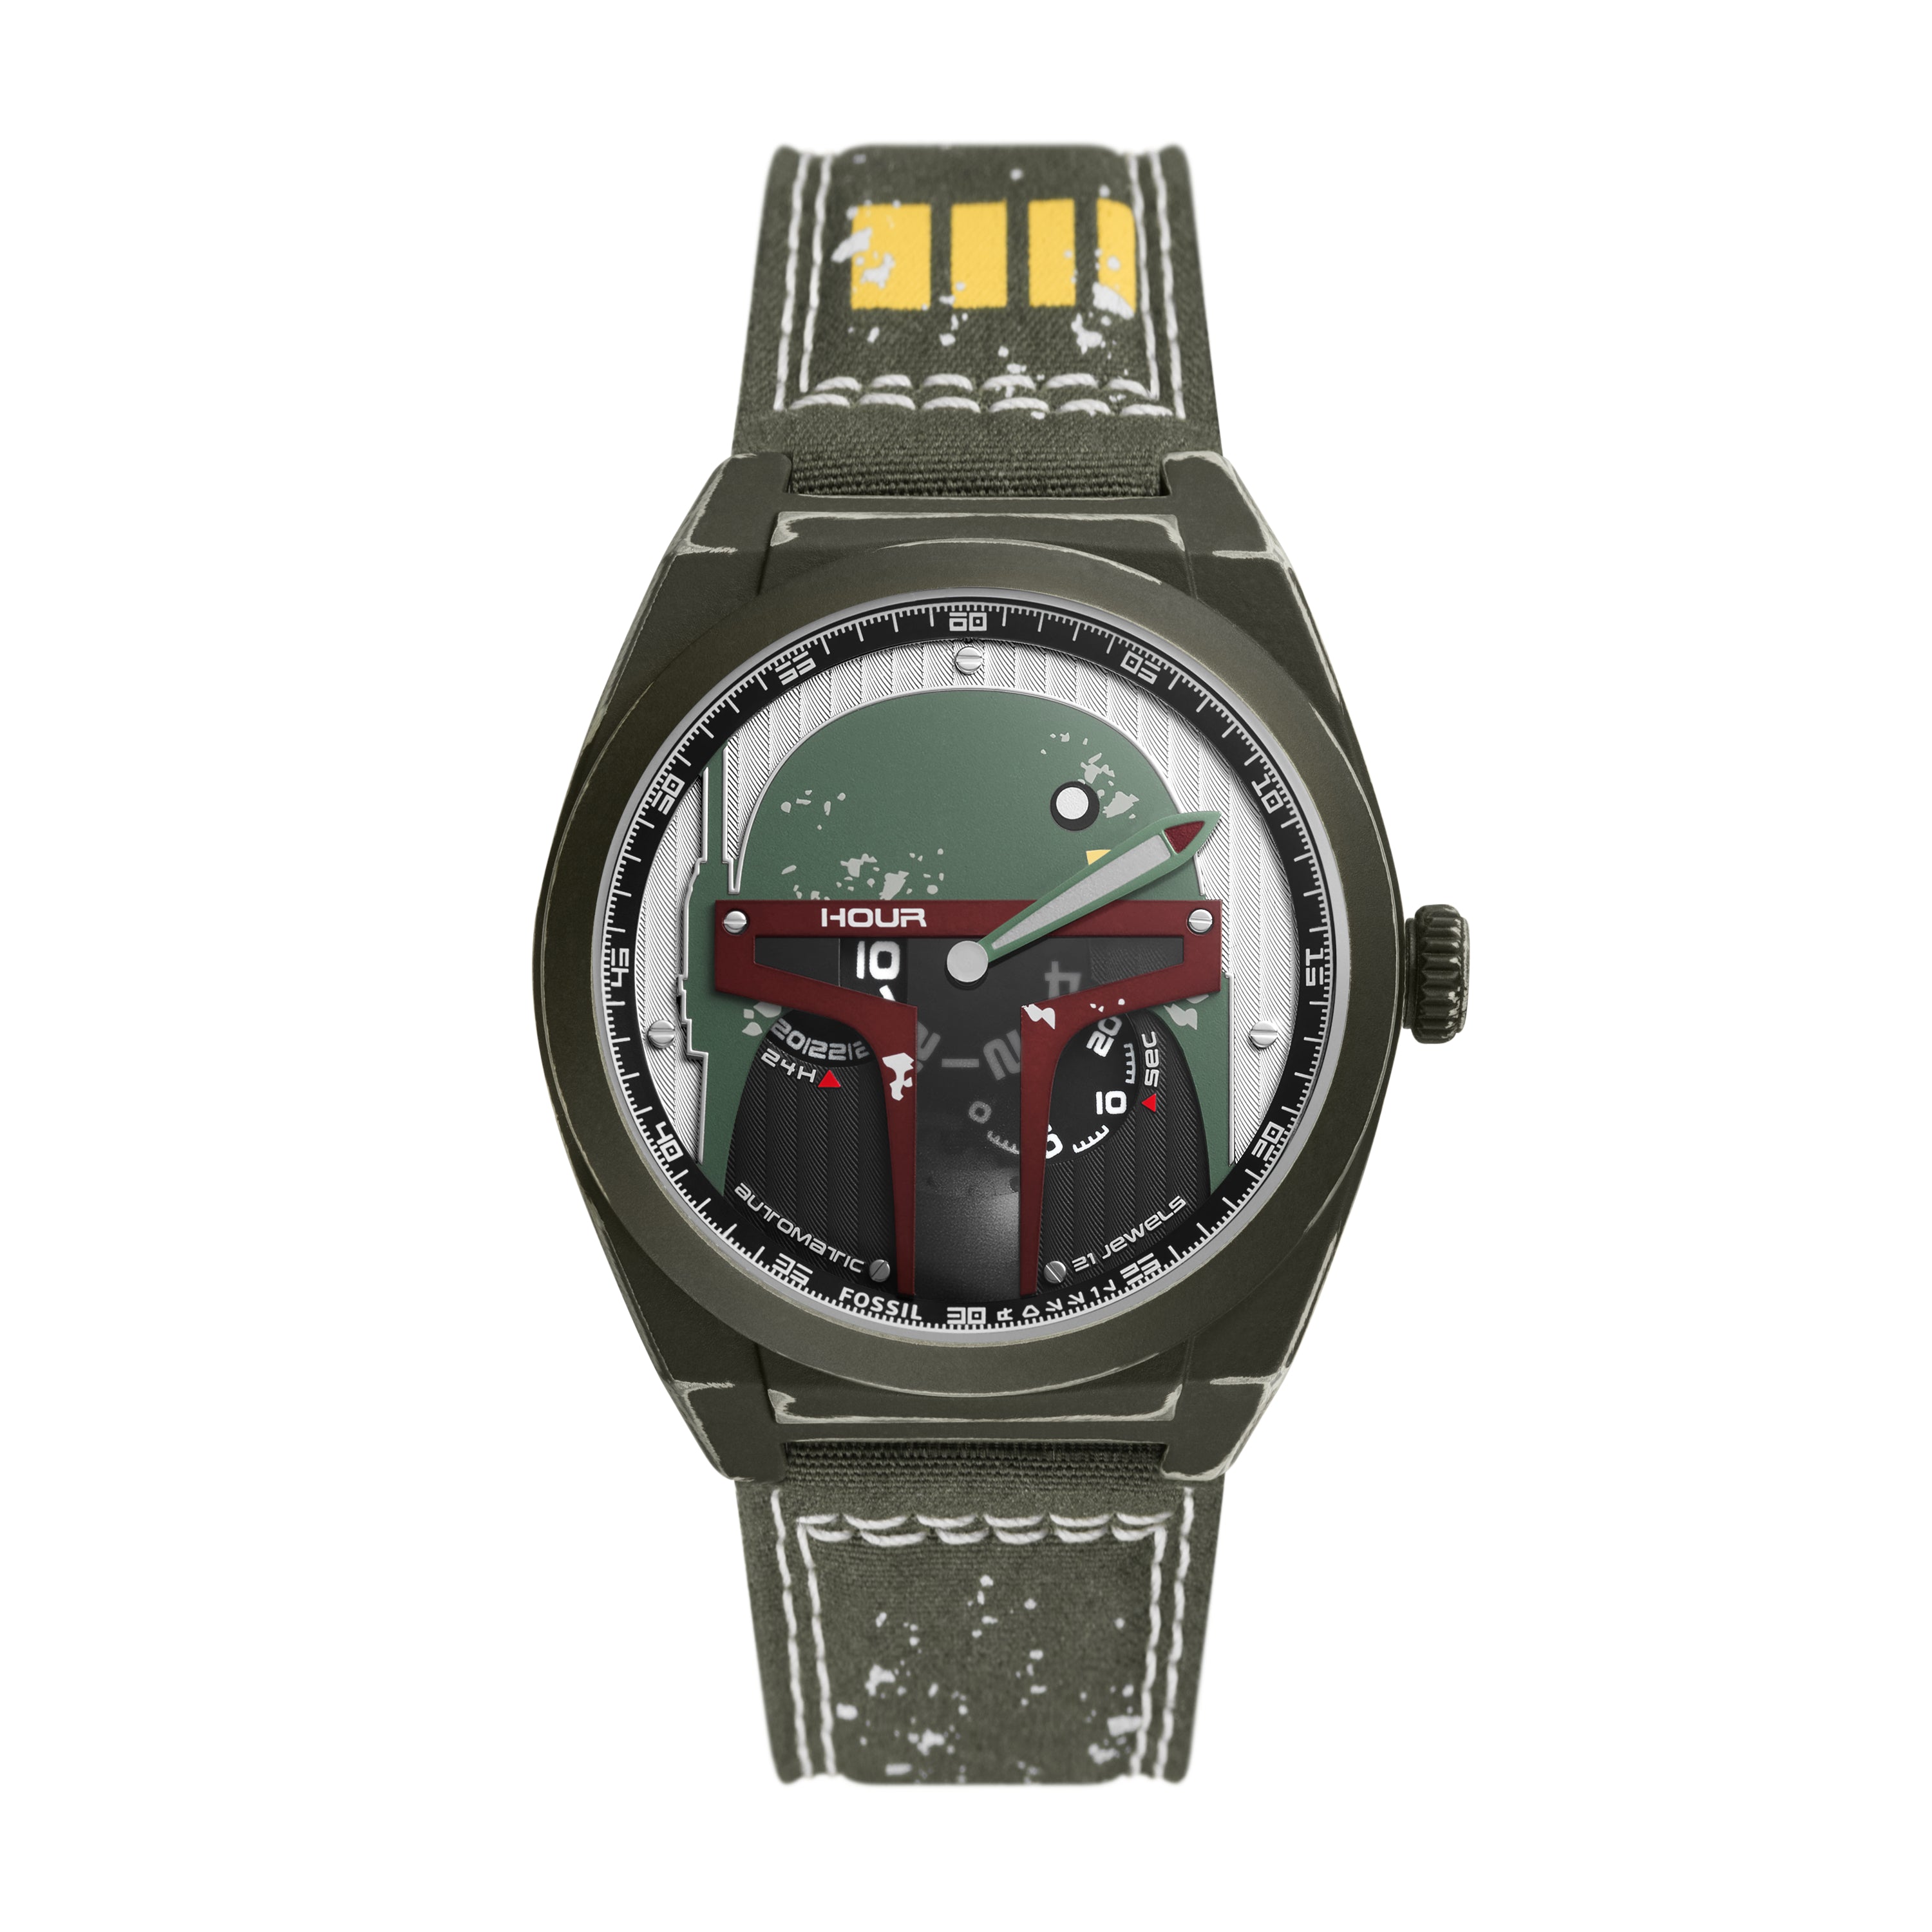 Fossil Limited Edition Star Wars Boba Fett Automatic Ventile Strap